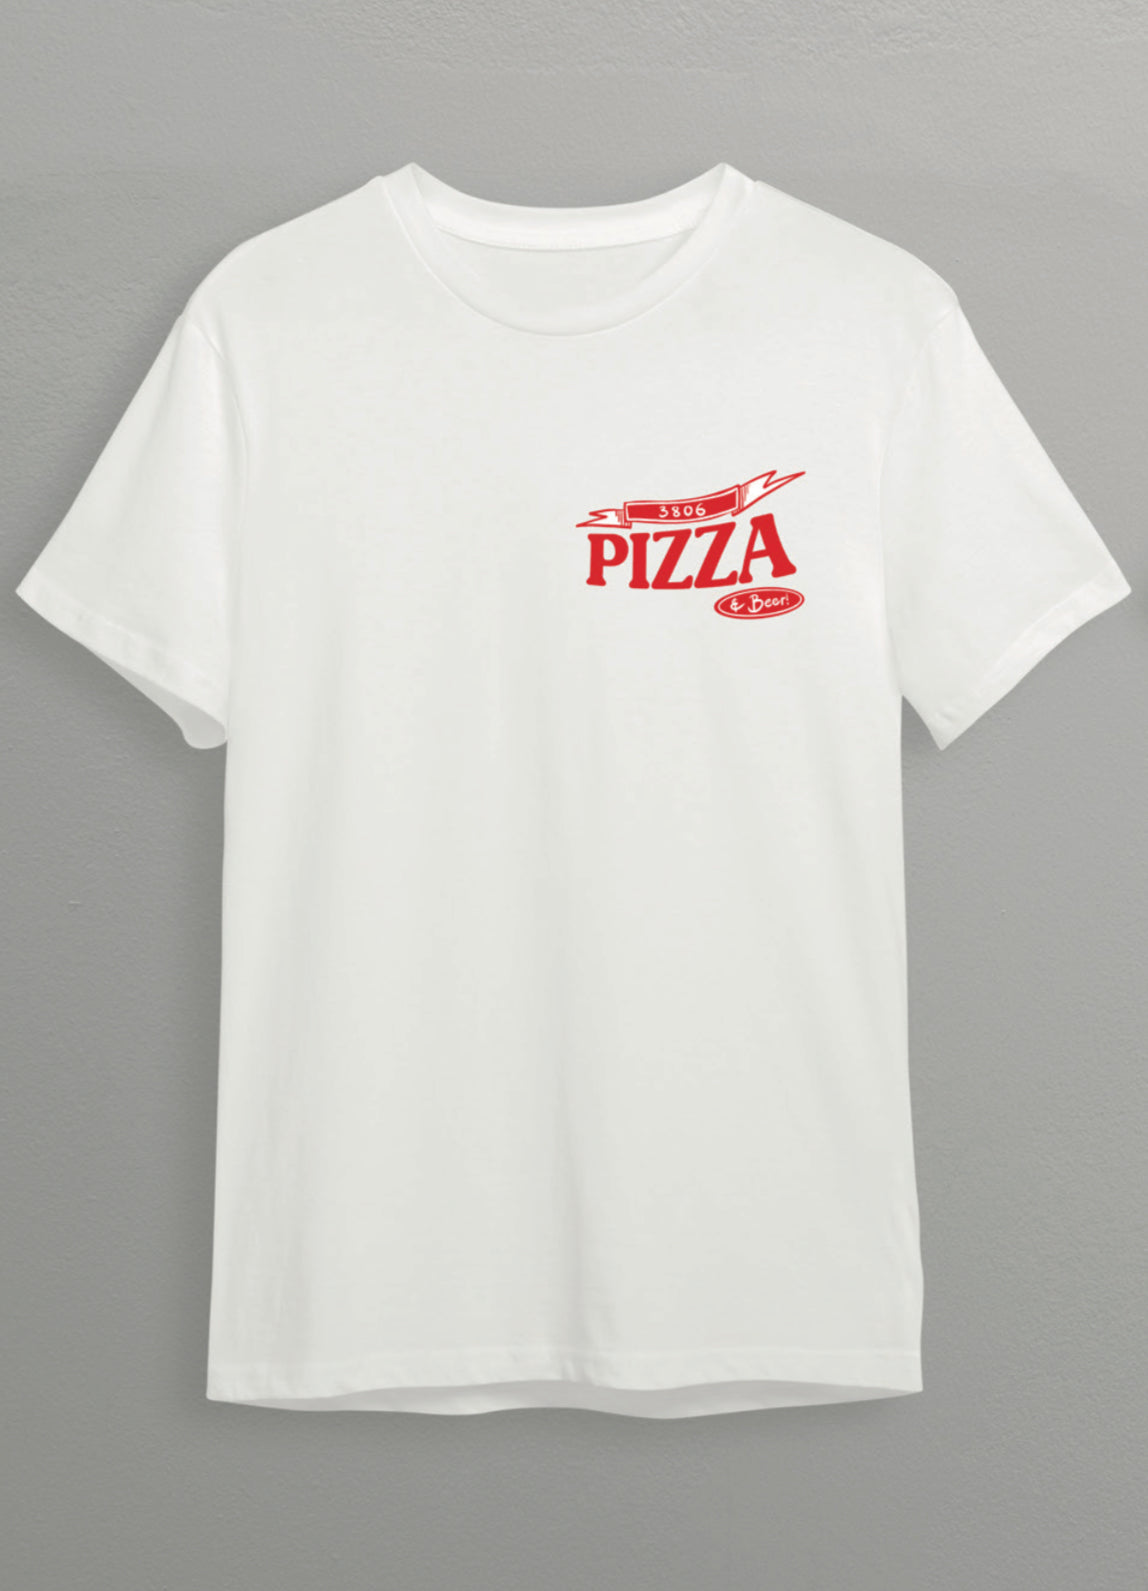 Limited Edition 3806 Pizza Tee